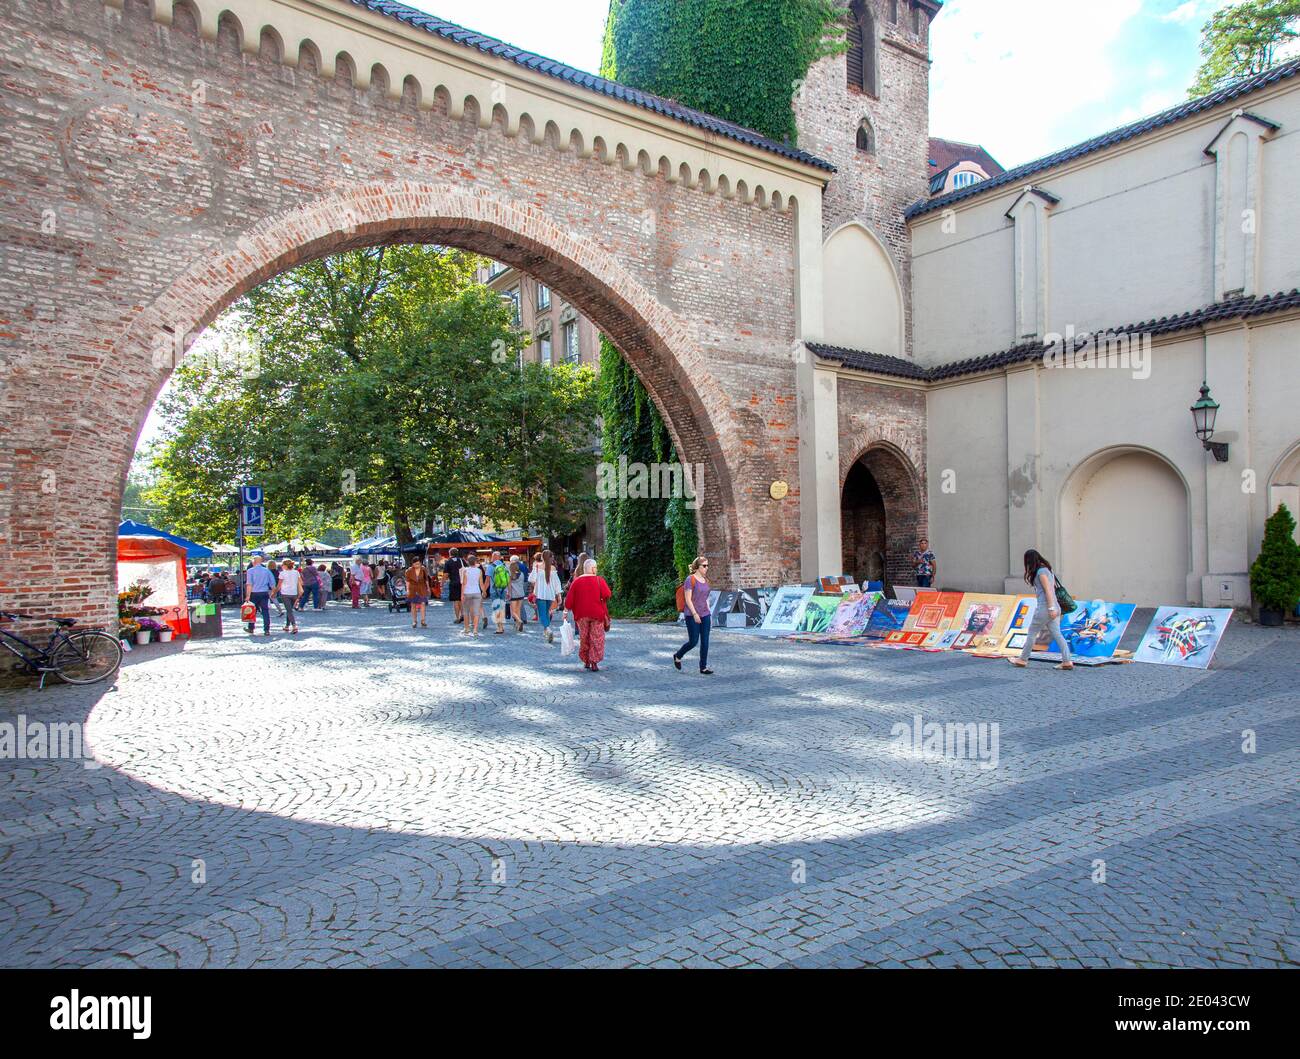 The Sendlinger Tor (translated: Sendling Gate) is a city gate at the southern extremity of the historic old town area of Munich. Stock Photo